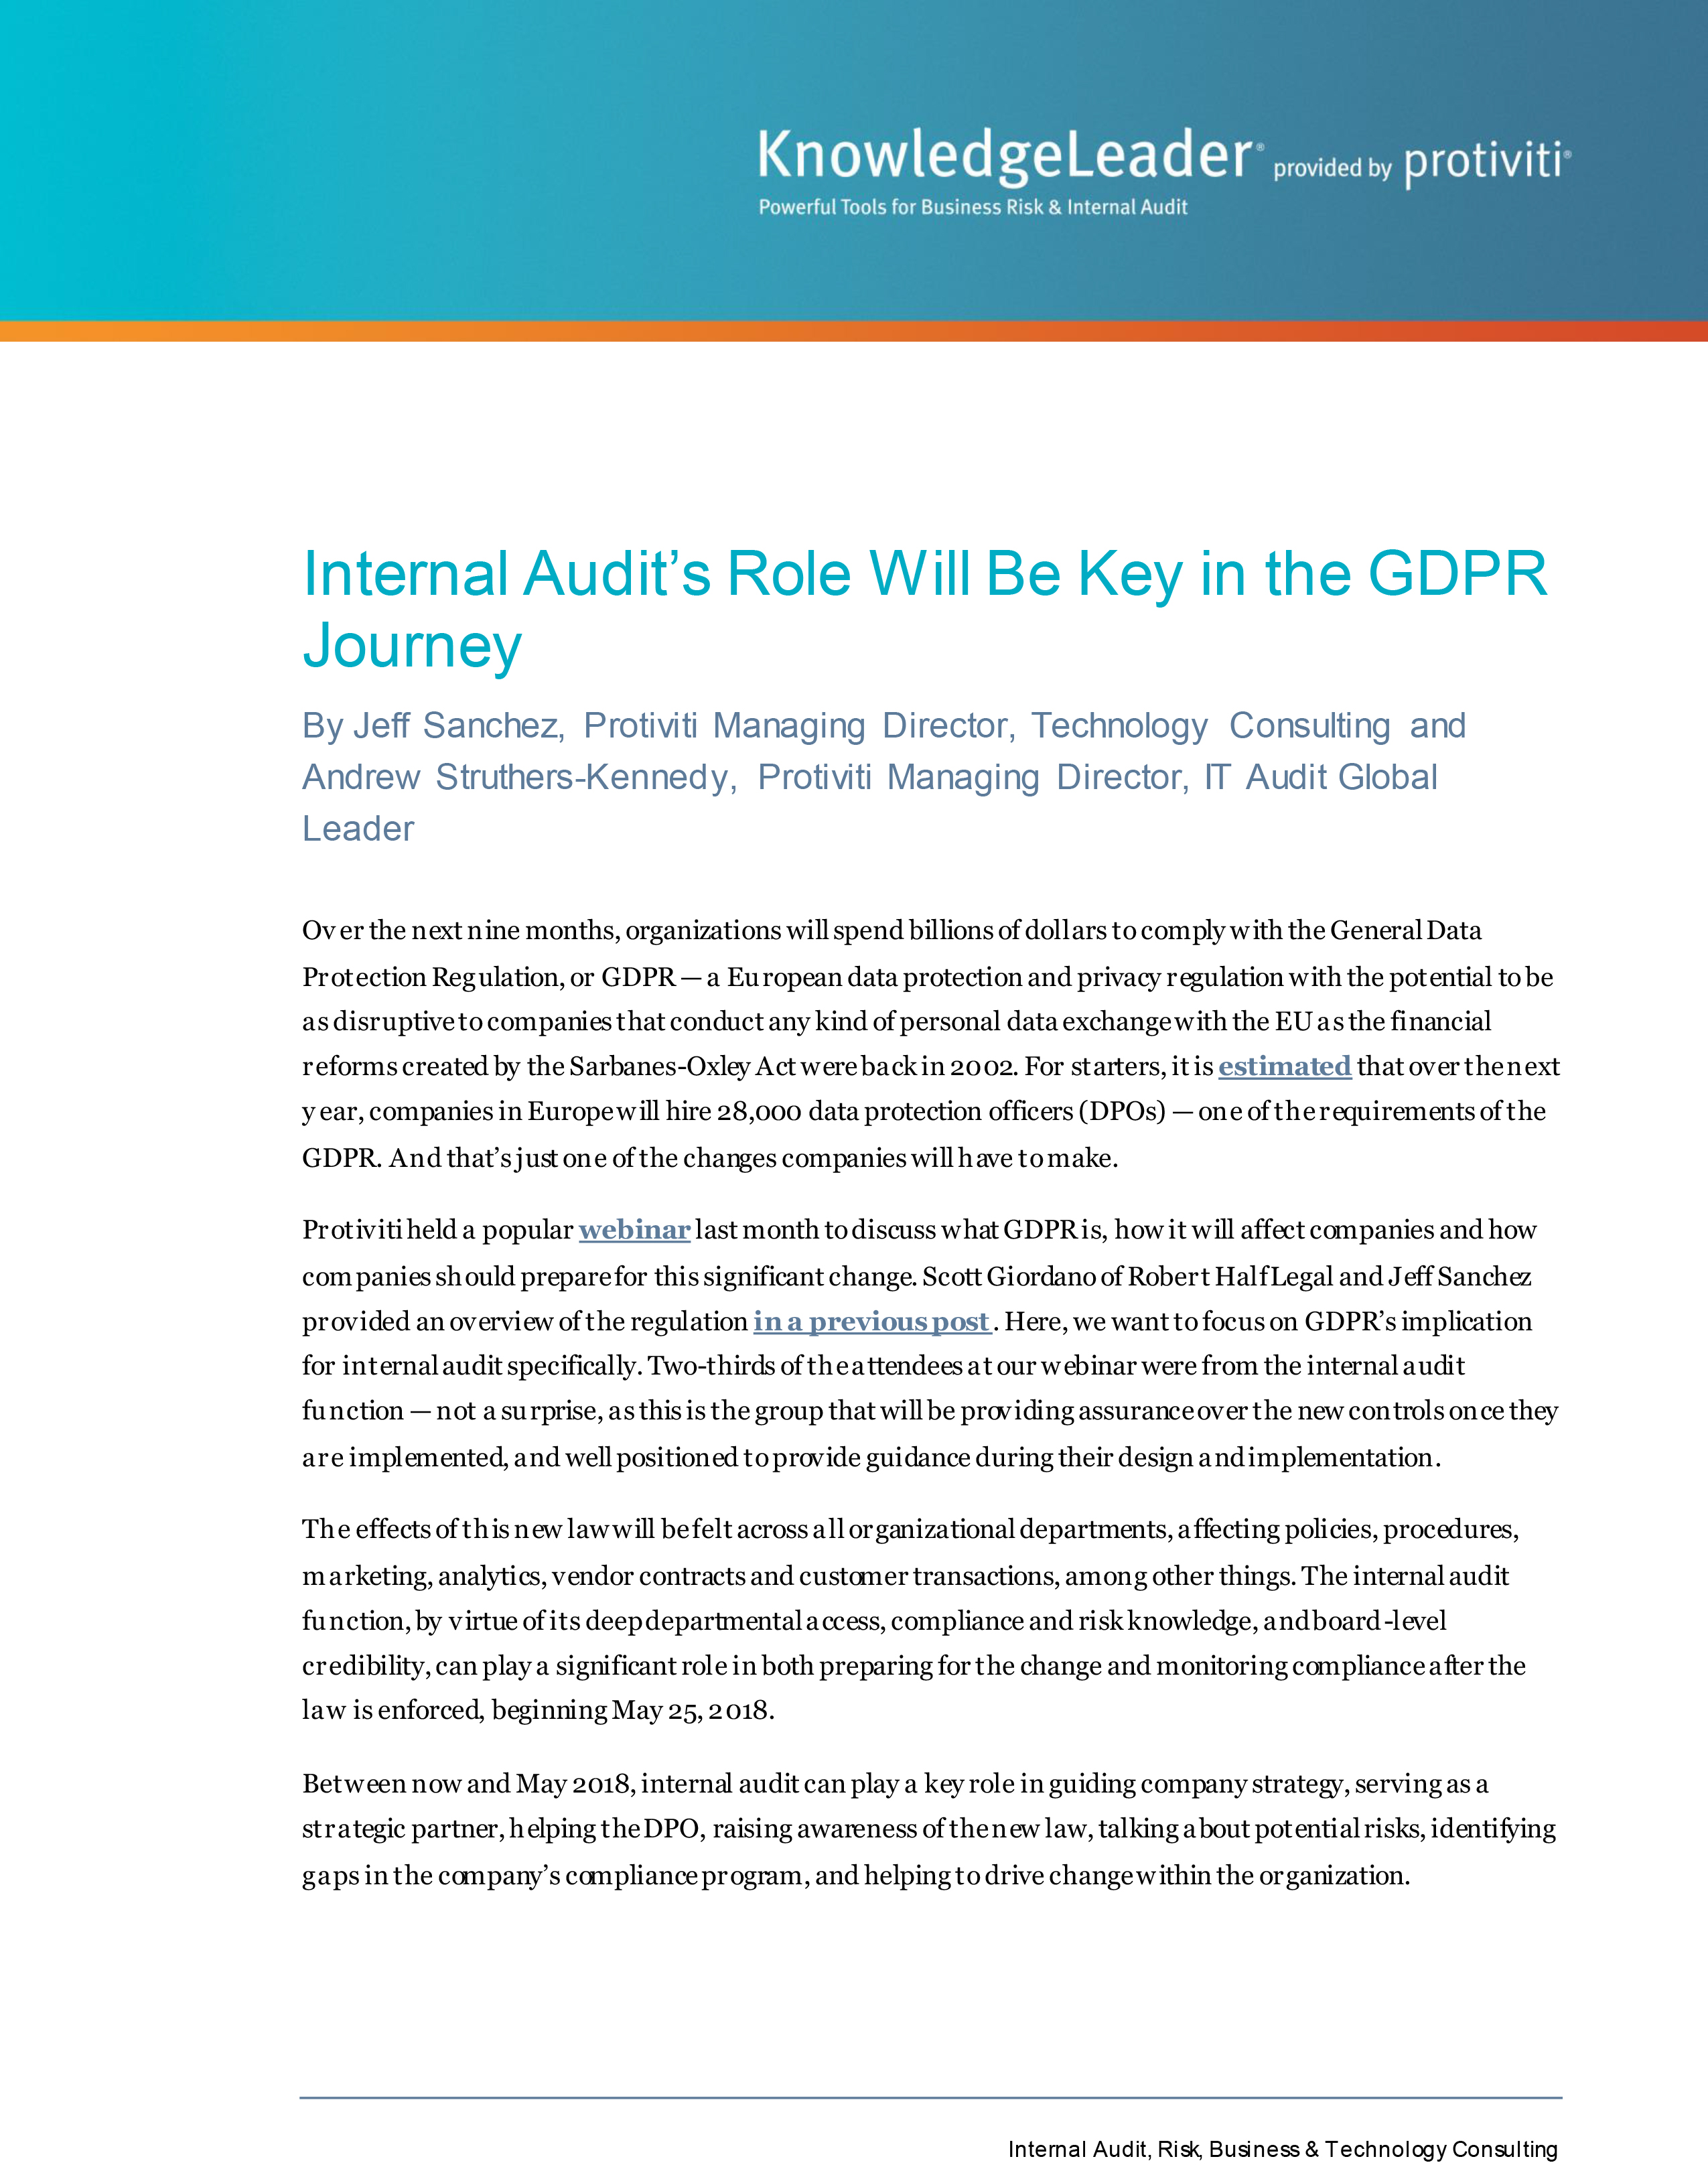 Screenshot of the first page of Internal Audit’s Role Will Be Key in the GDPR Journey